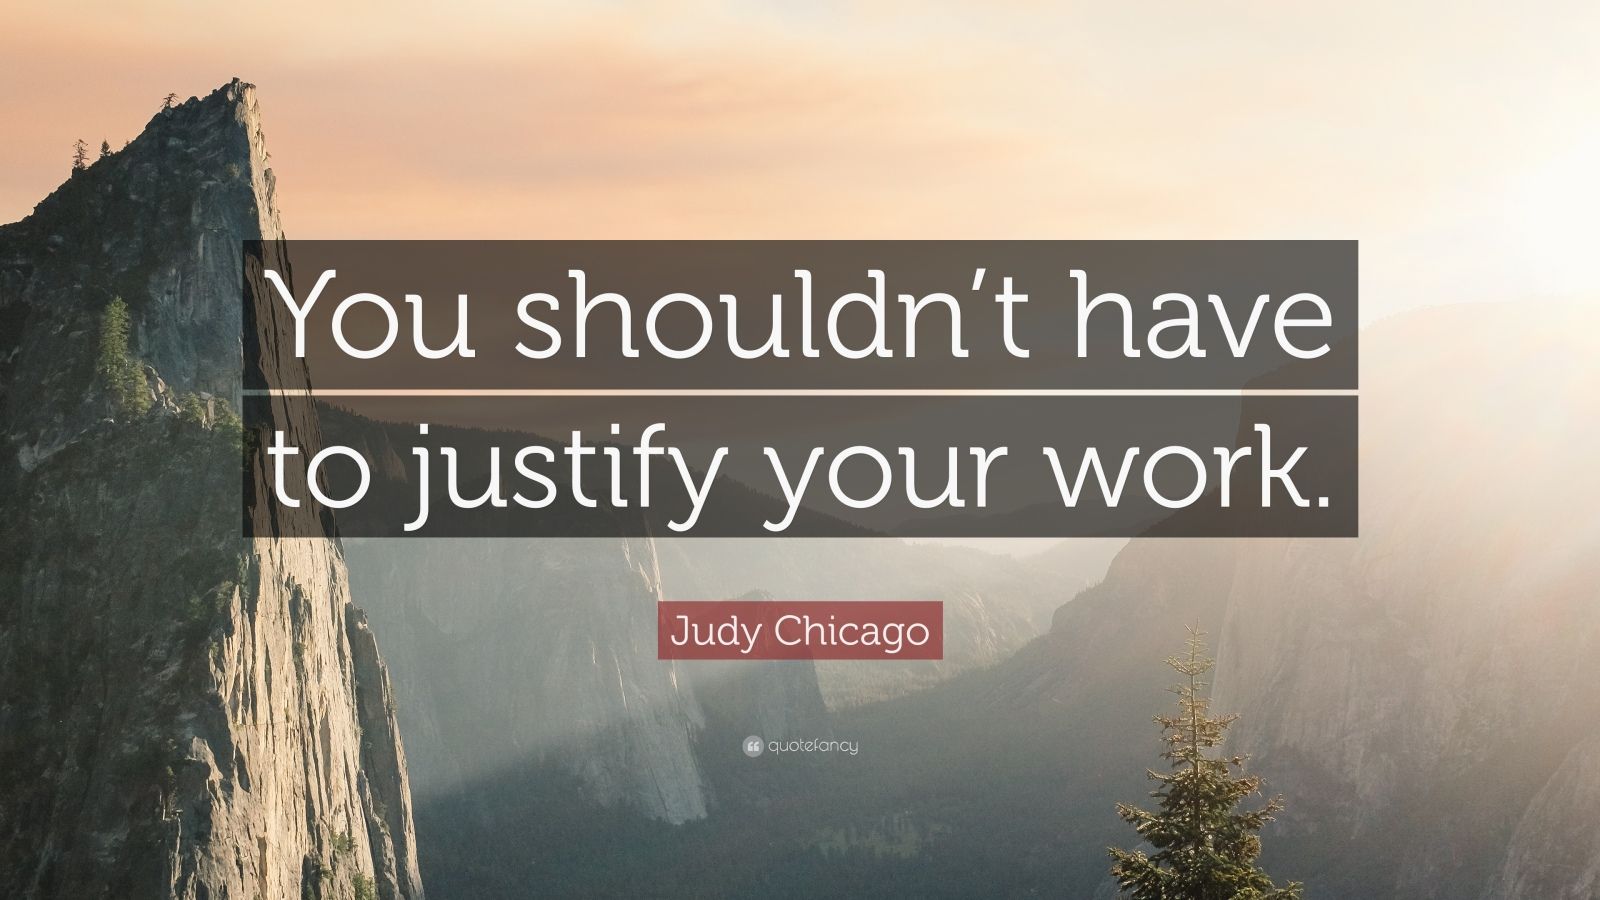 Top 15 Judy Chicago Quotes | 2021 Edition | Free Images - QuoteFancy